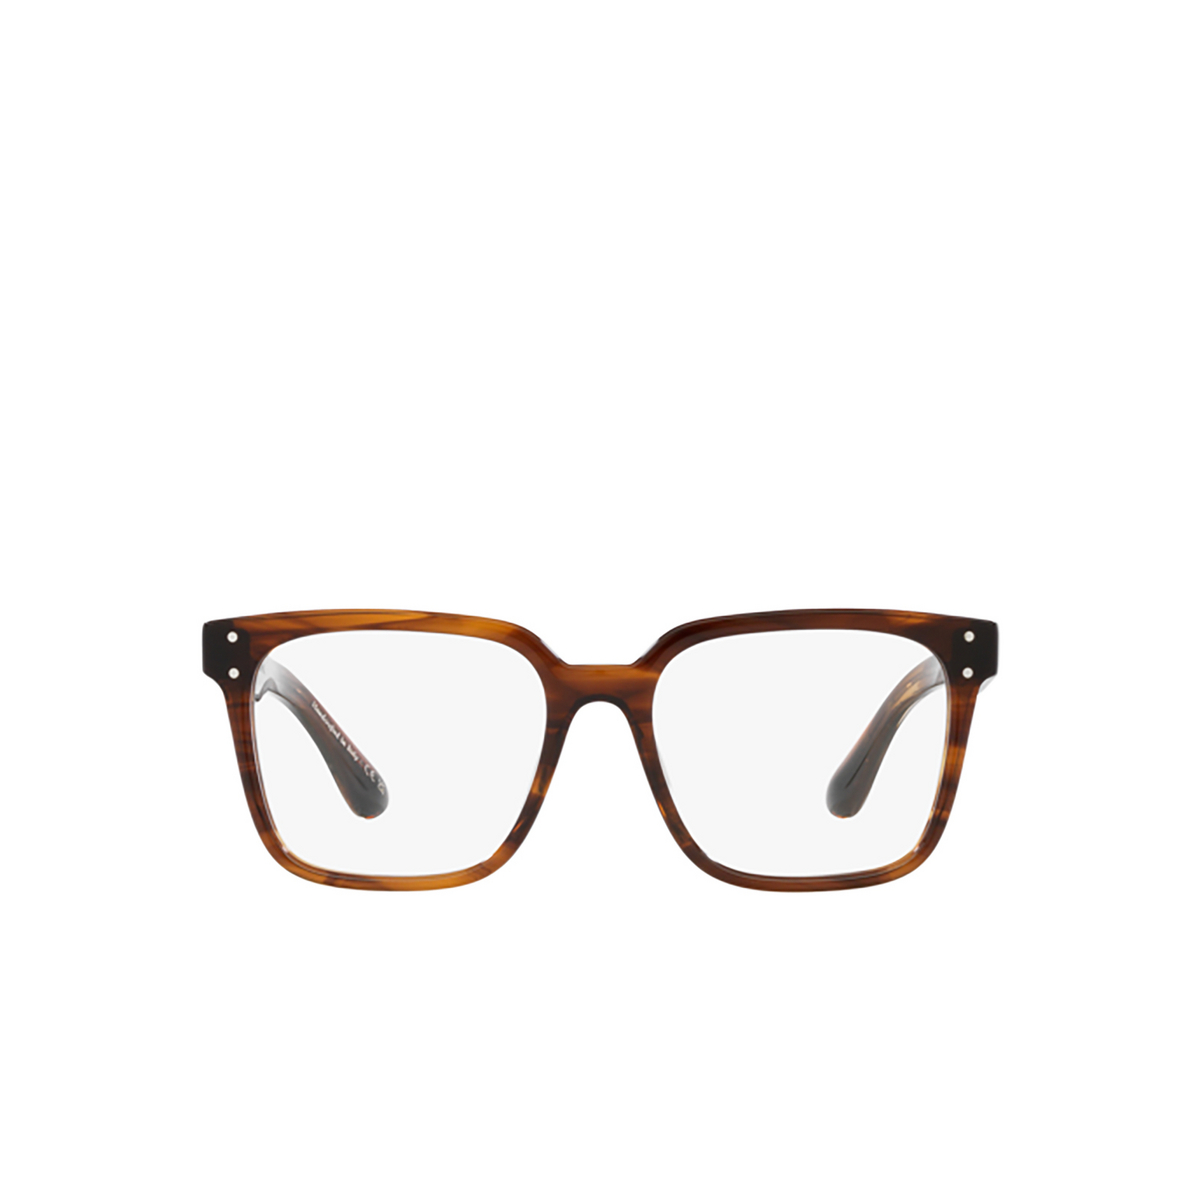 Oliver Peoples PARCELL Eyeglasses 1724 Tuscany Tortoise - front view